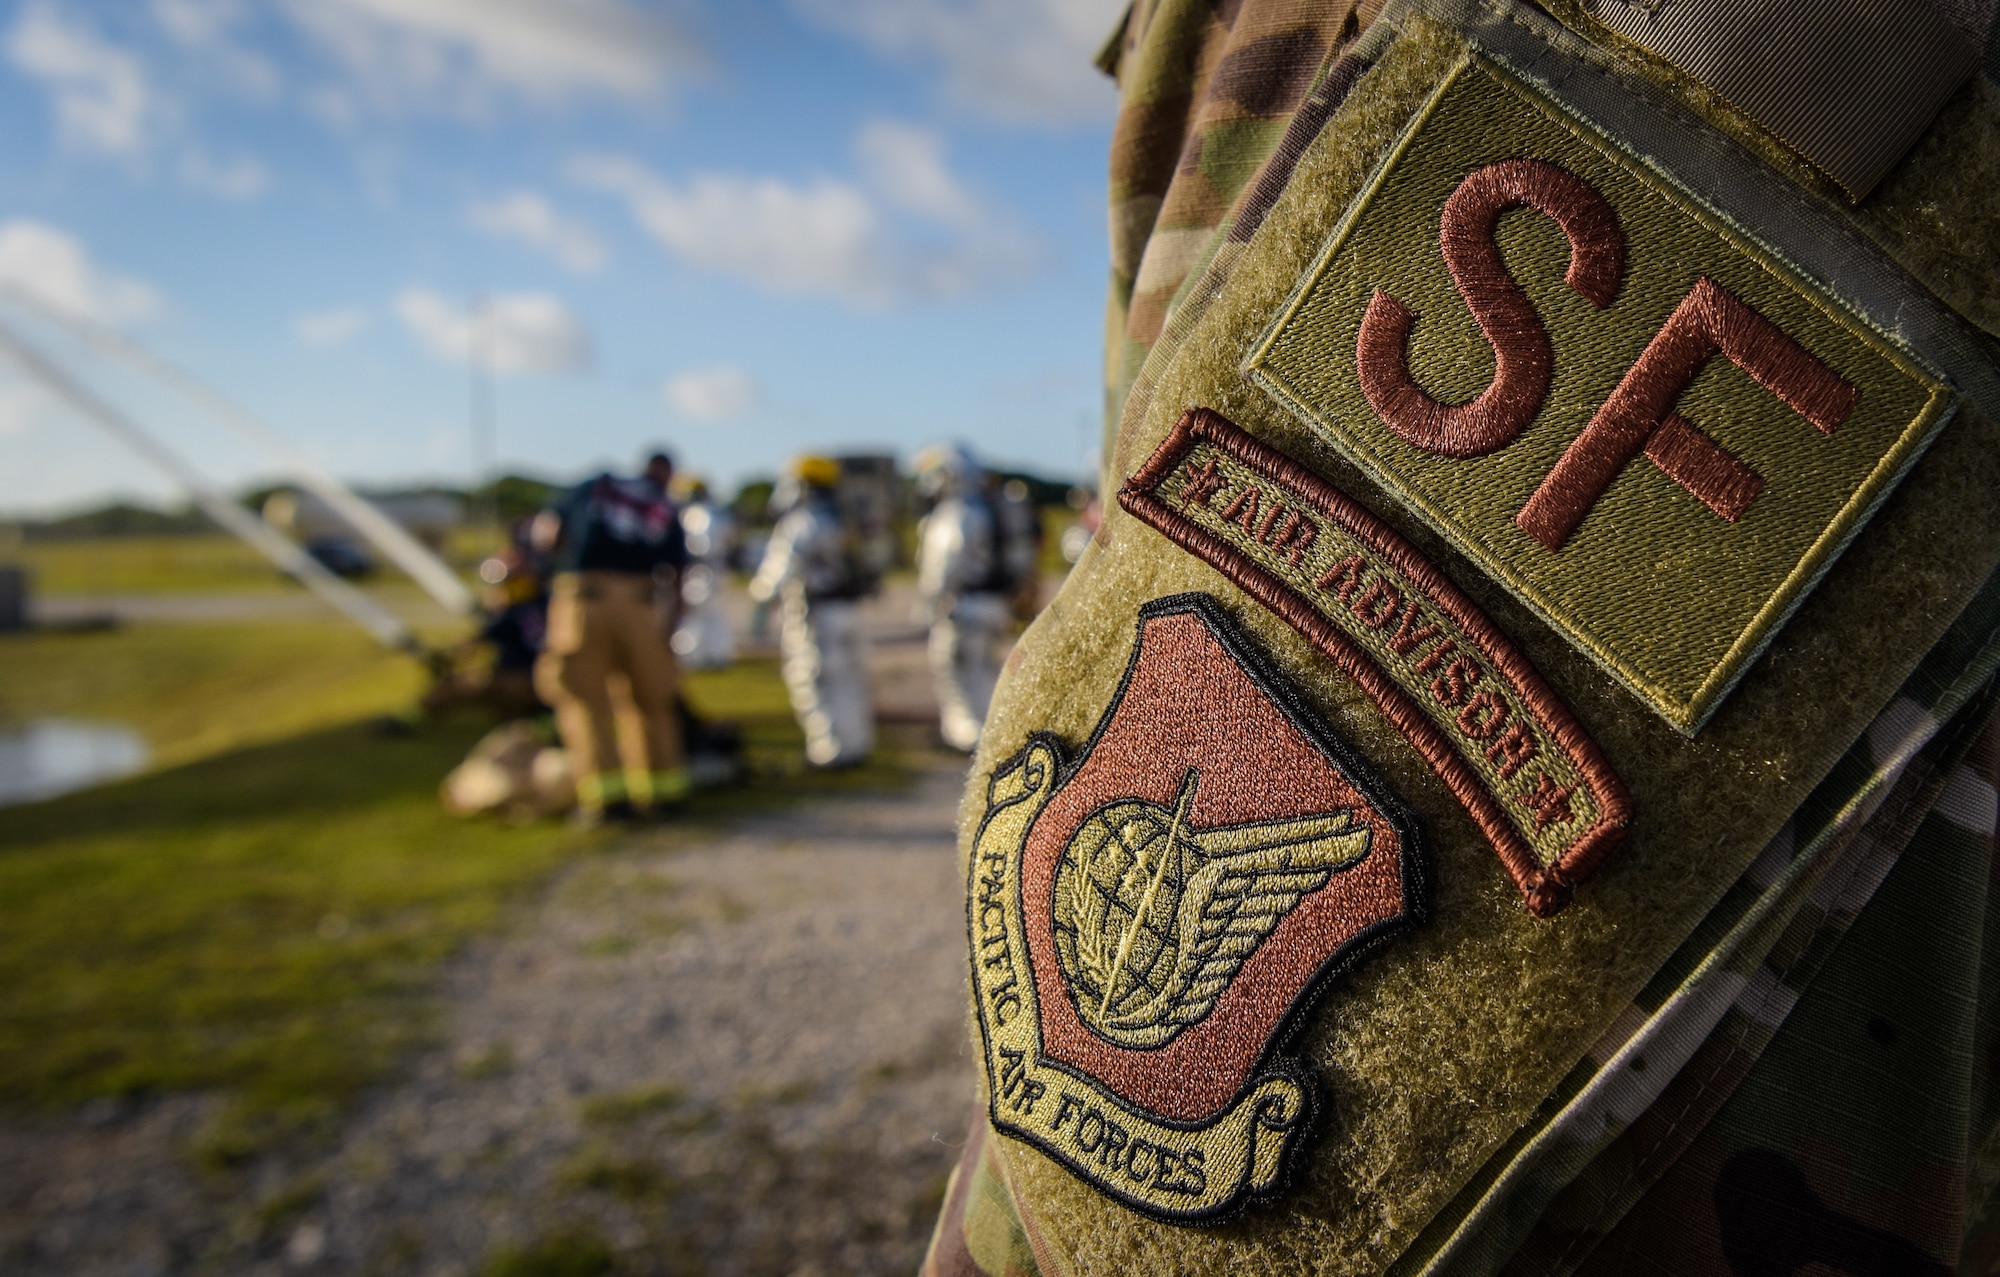 U.S. Air Force Master Sgt. Anthony Nixon, air advisor assigned to the 36th Contingency Response Support Squadron, observes firefighters during joint aircraft fire training at Andersen Air Force Base, Guam, May 11, 2021.